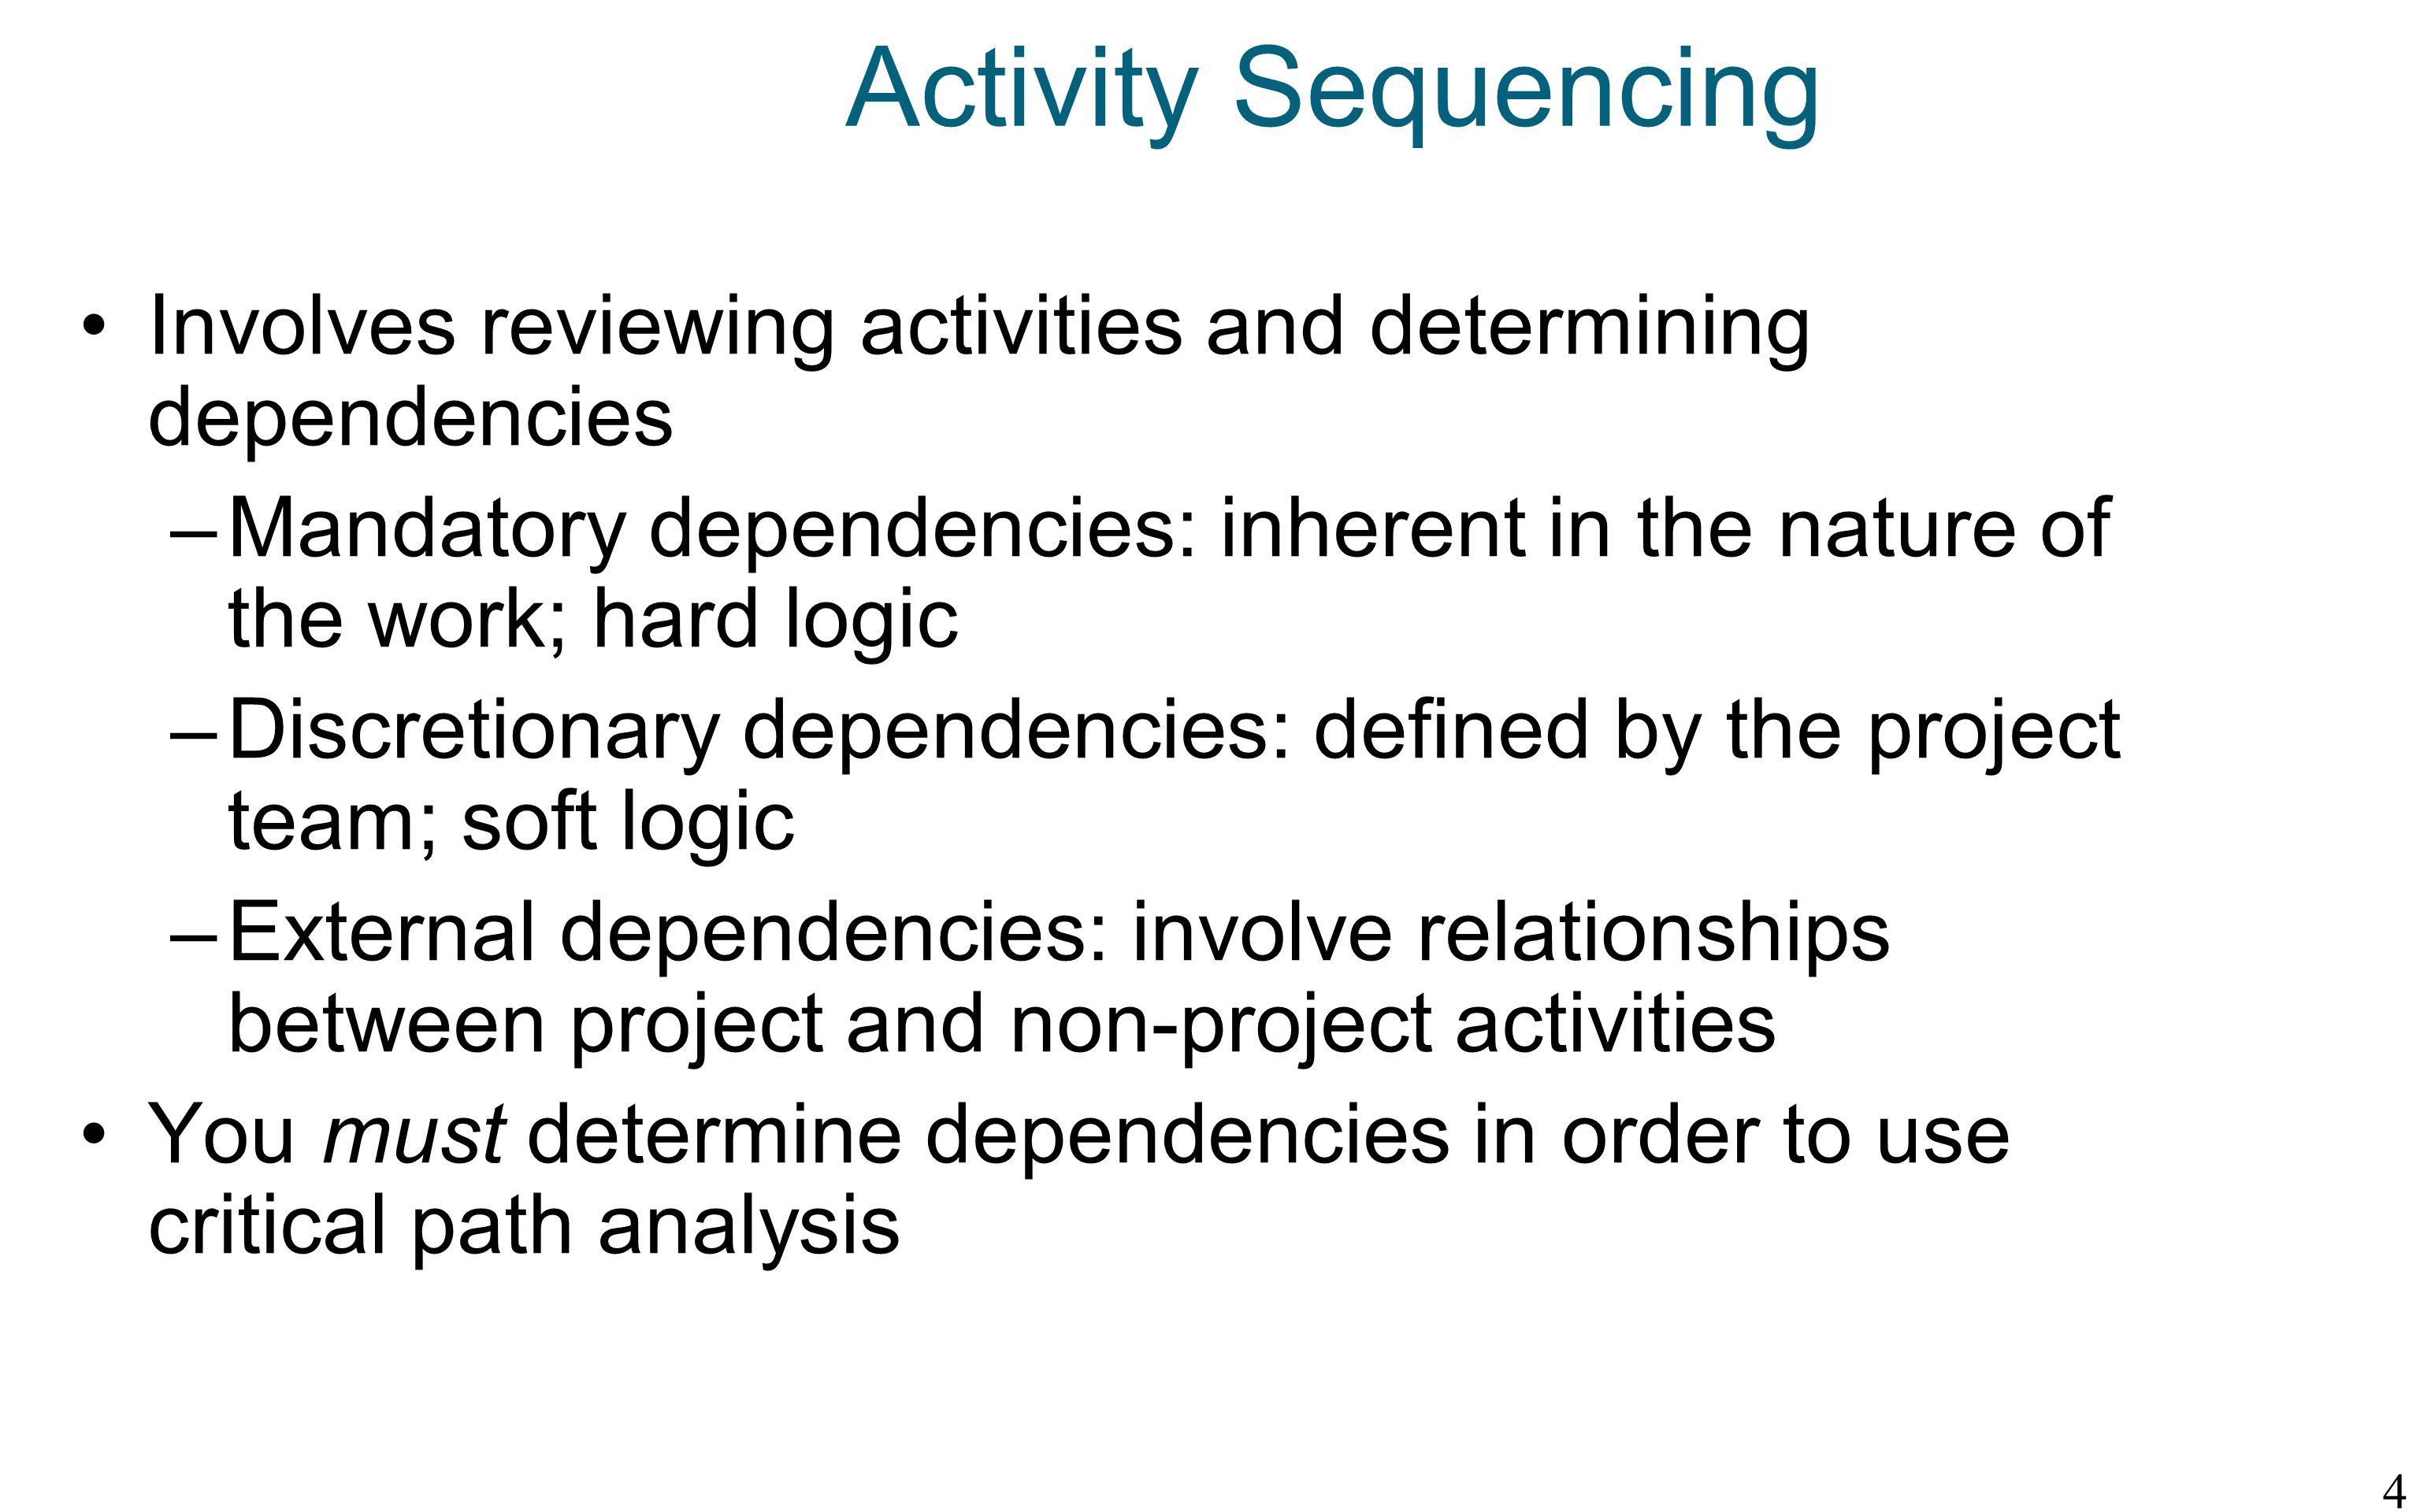 Activity Sequencing Involves reviewing activities and determining dependencies.